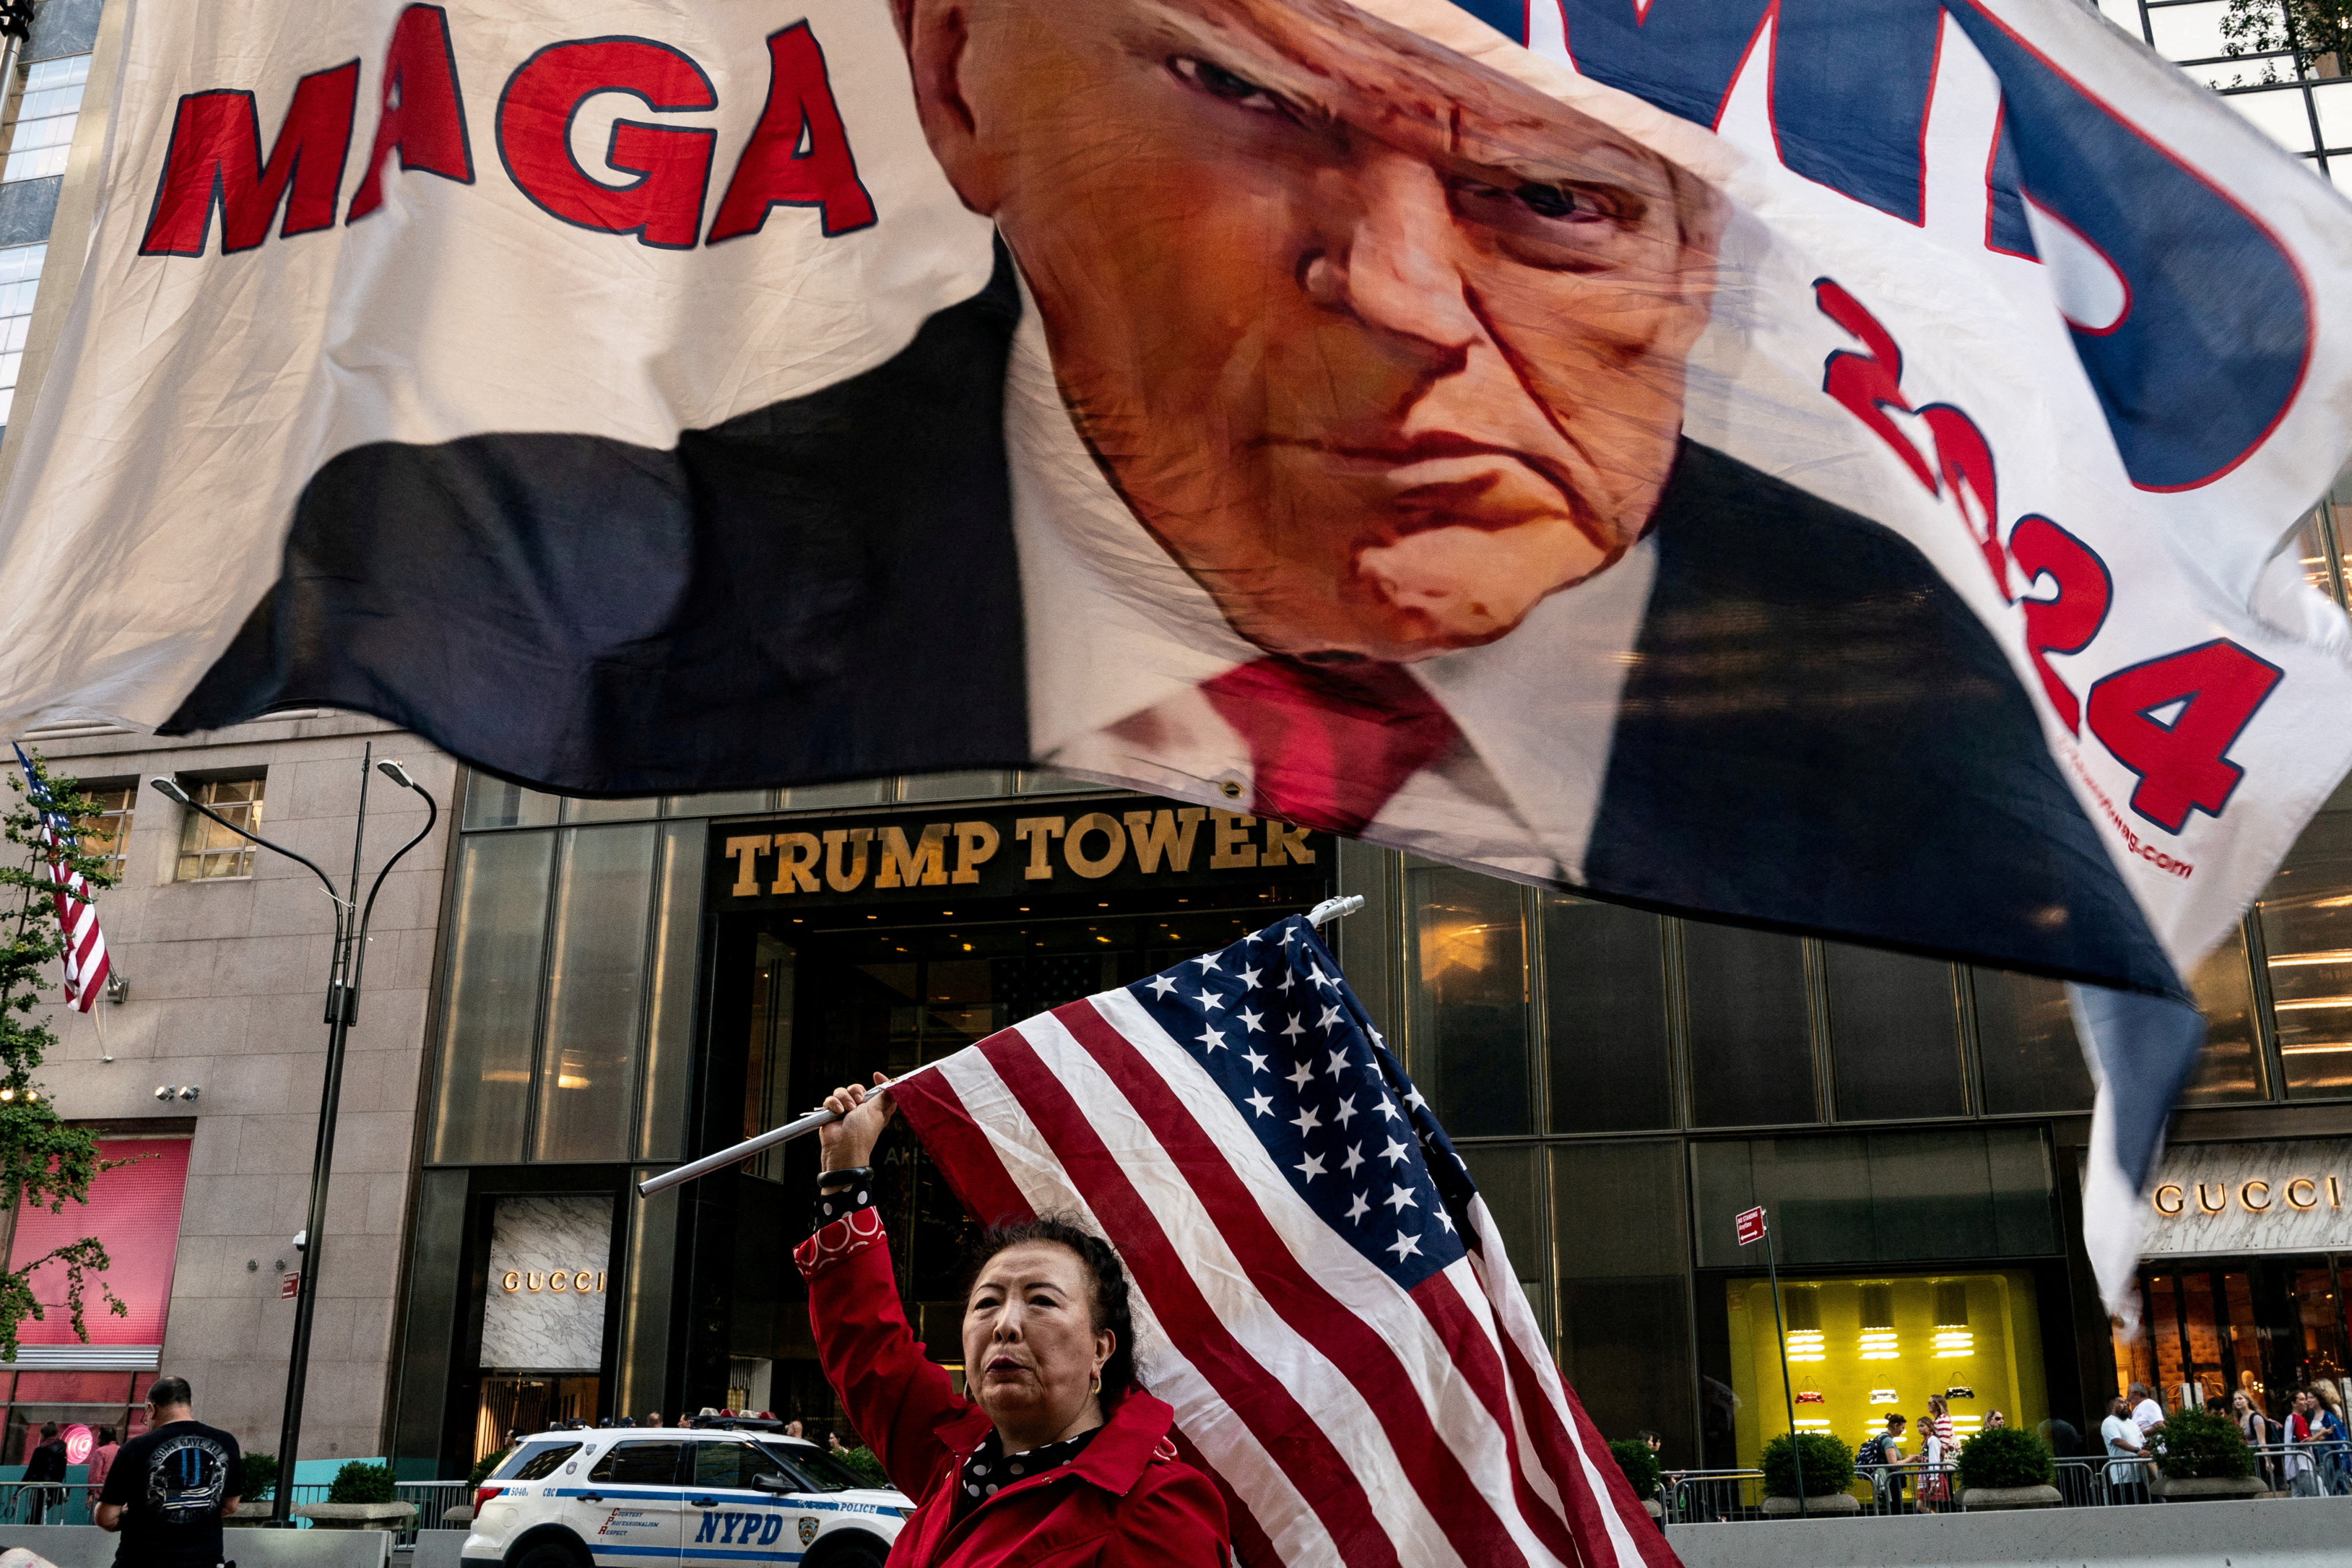 A supporter of former US President Donald Trump holds up a national flag at Trump Tower in New York City, on October 1. Trump’s most loyal supporters are looking to create as much chaos in America as the man they adore. Photo: Reuters